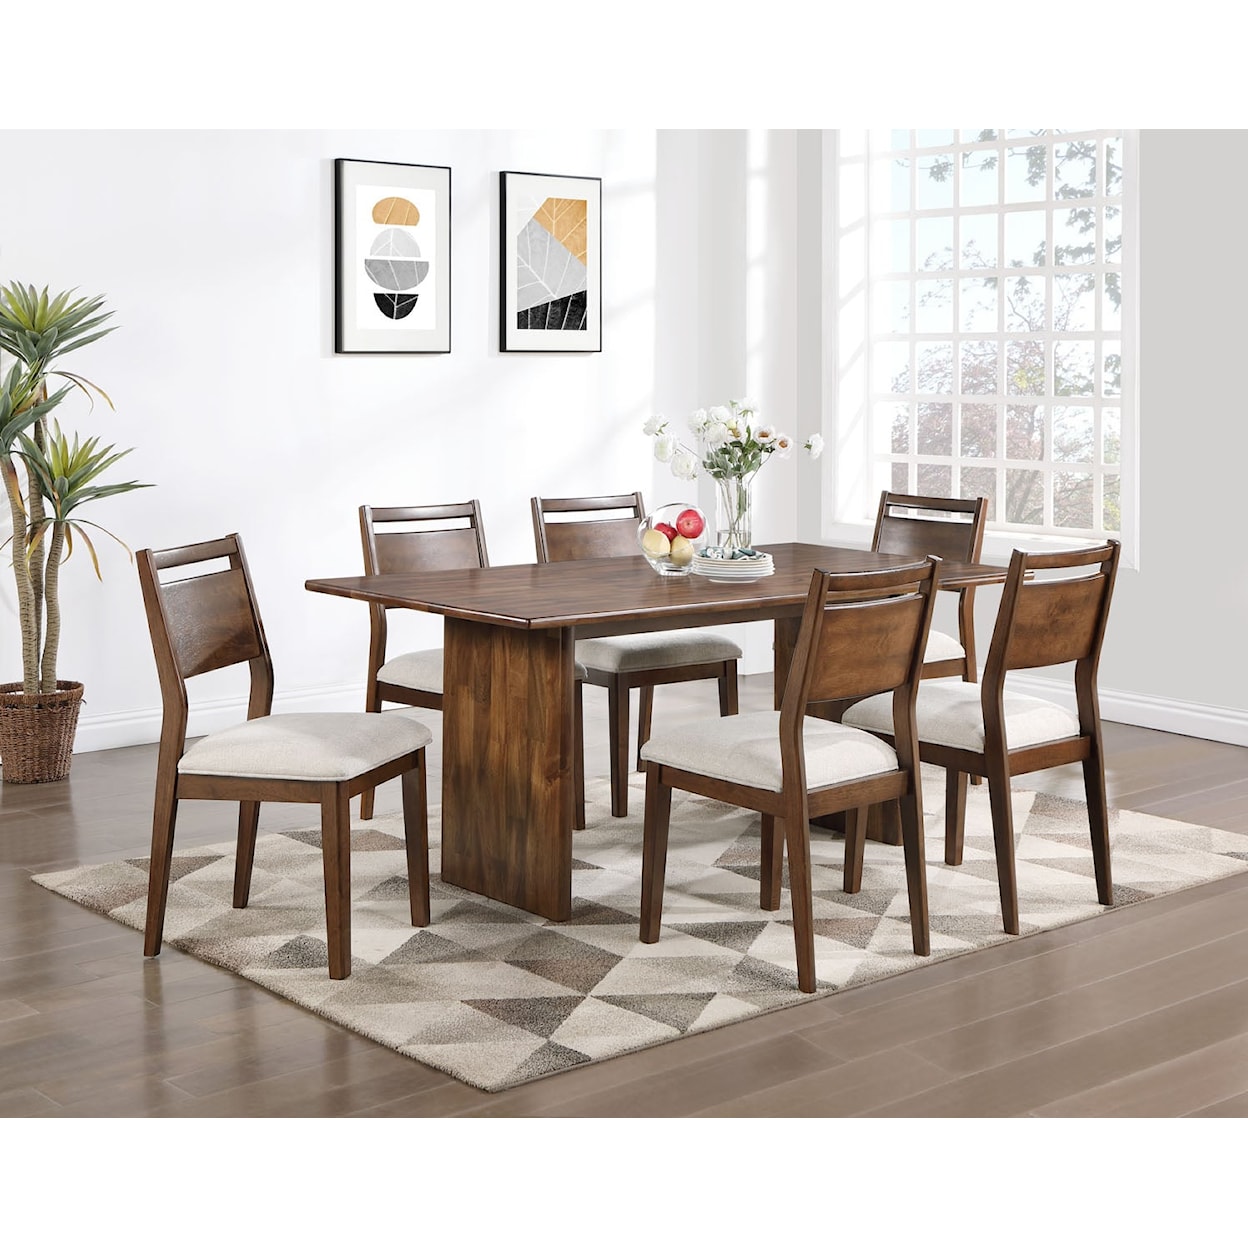 Holland House 1139 7-Piece Dining Set with Rectangular Table